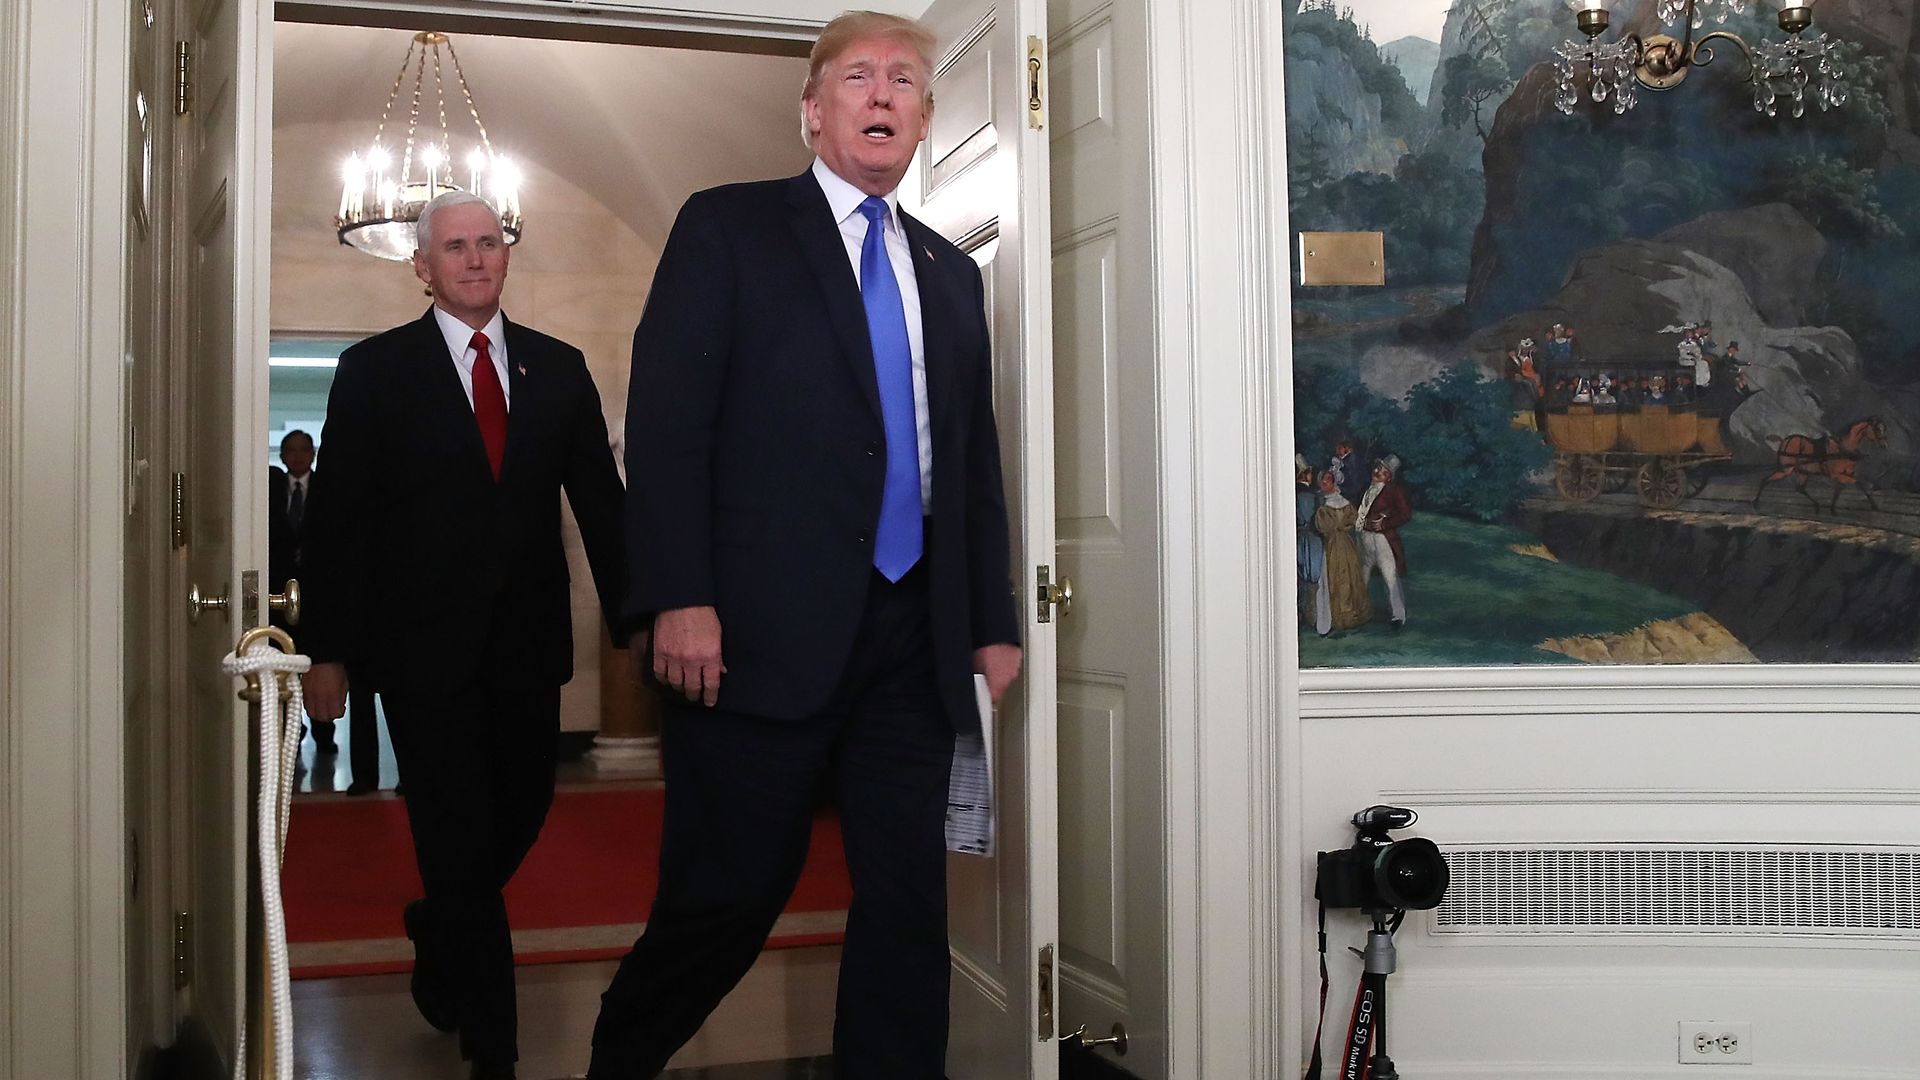 President Donald Trump and Vice President Mike Pence walk into the Diplomat Room.